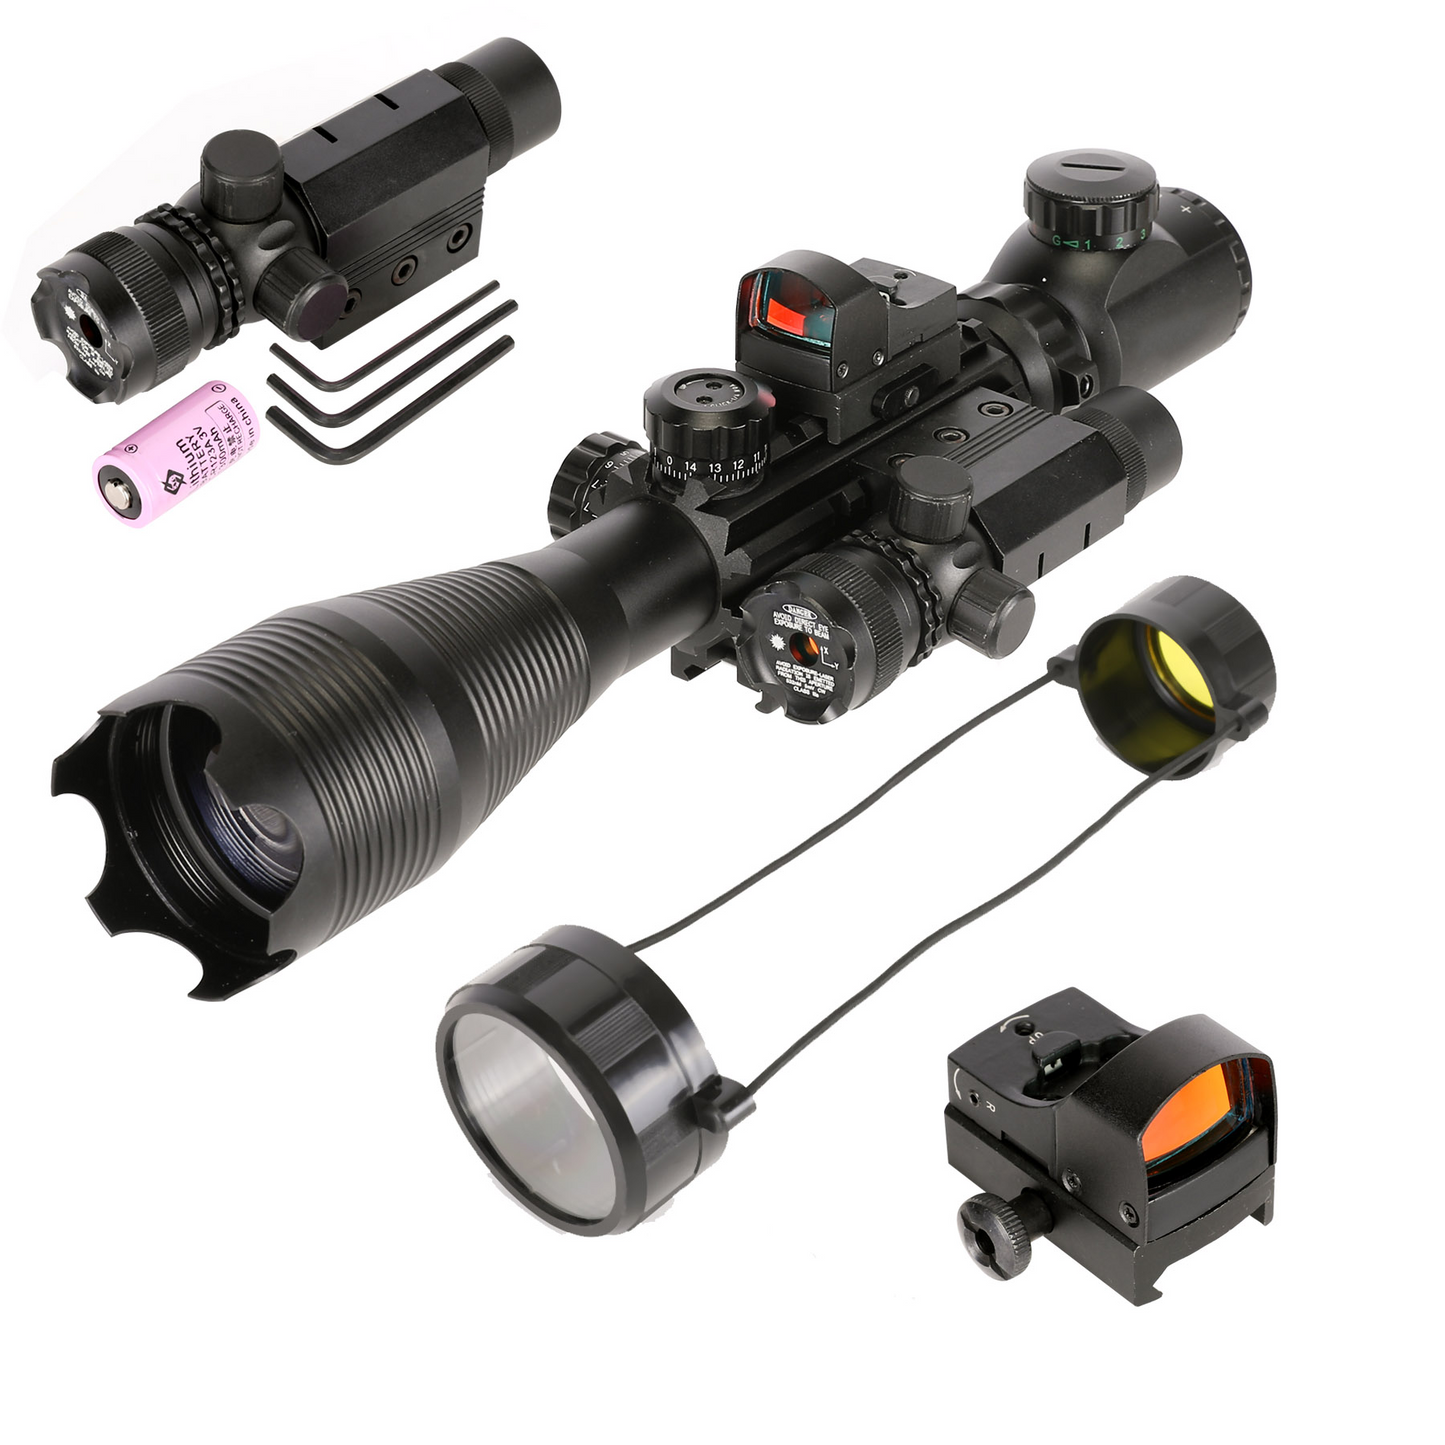 TAC-4: 4 Piece 4-16x50 Illuminated Reticle Scope Package